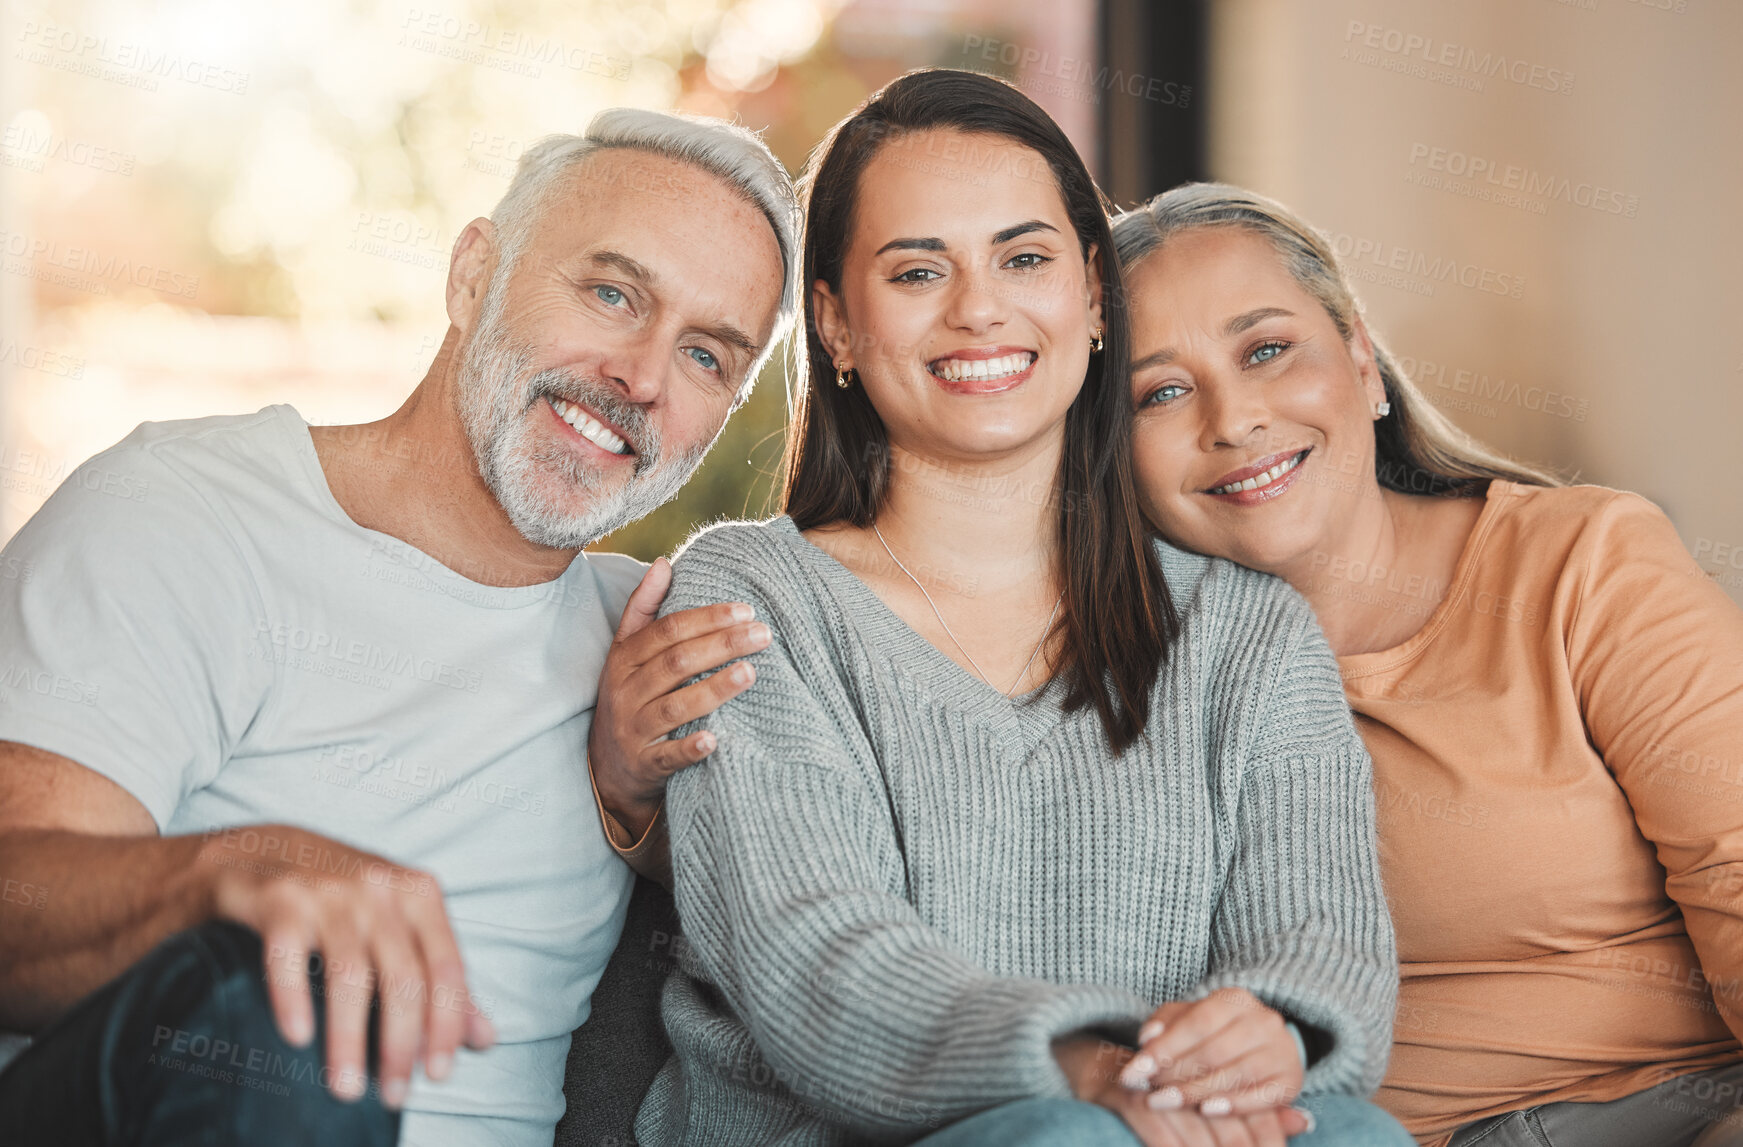 Buy stock photo Shot of a woman sitting on a couch with her parent